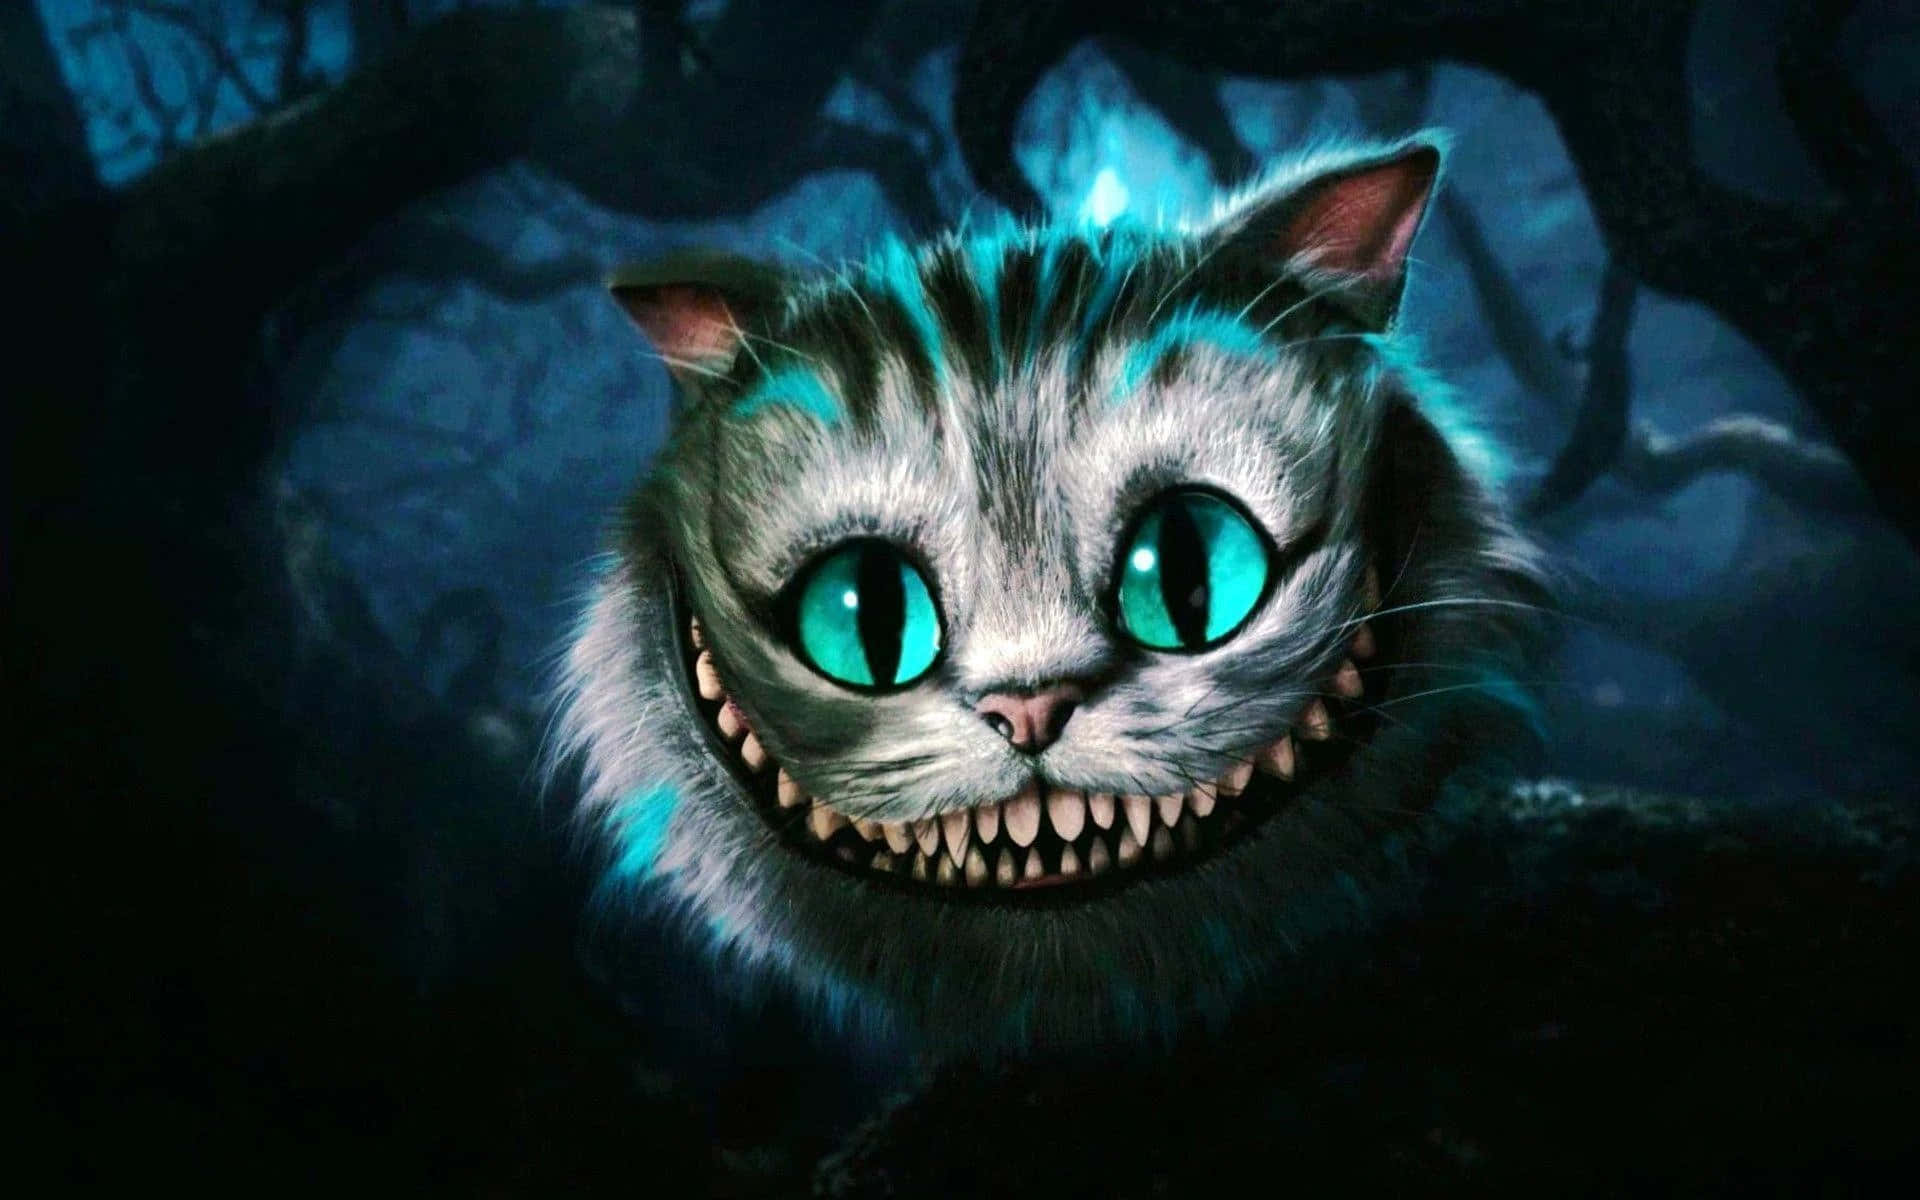 The Cheshire Cat's all-knowing, enigmatic expression